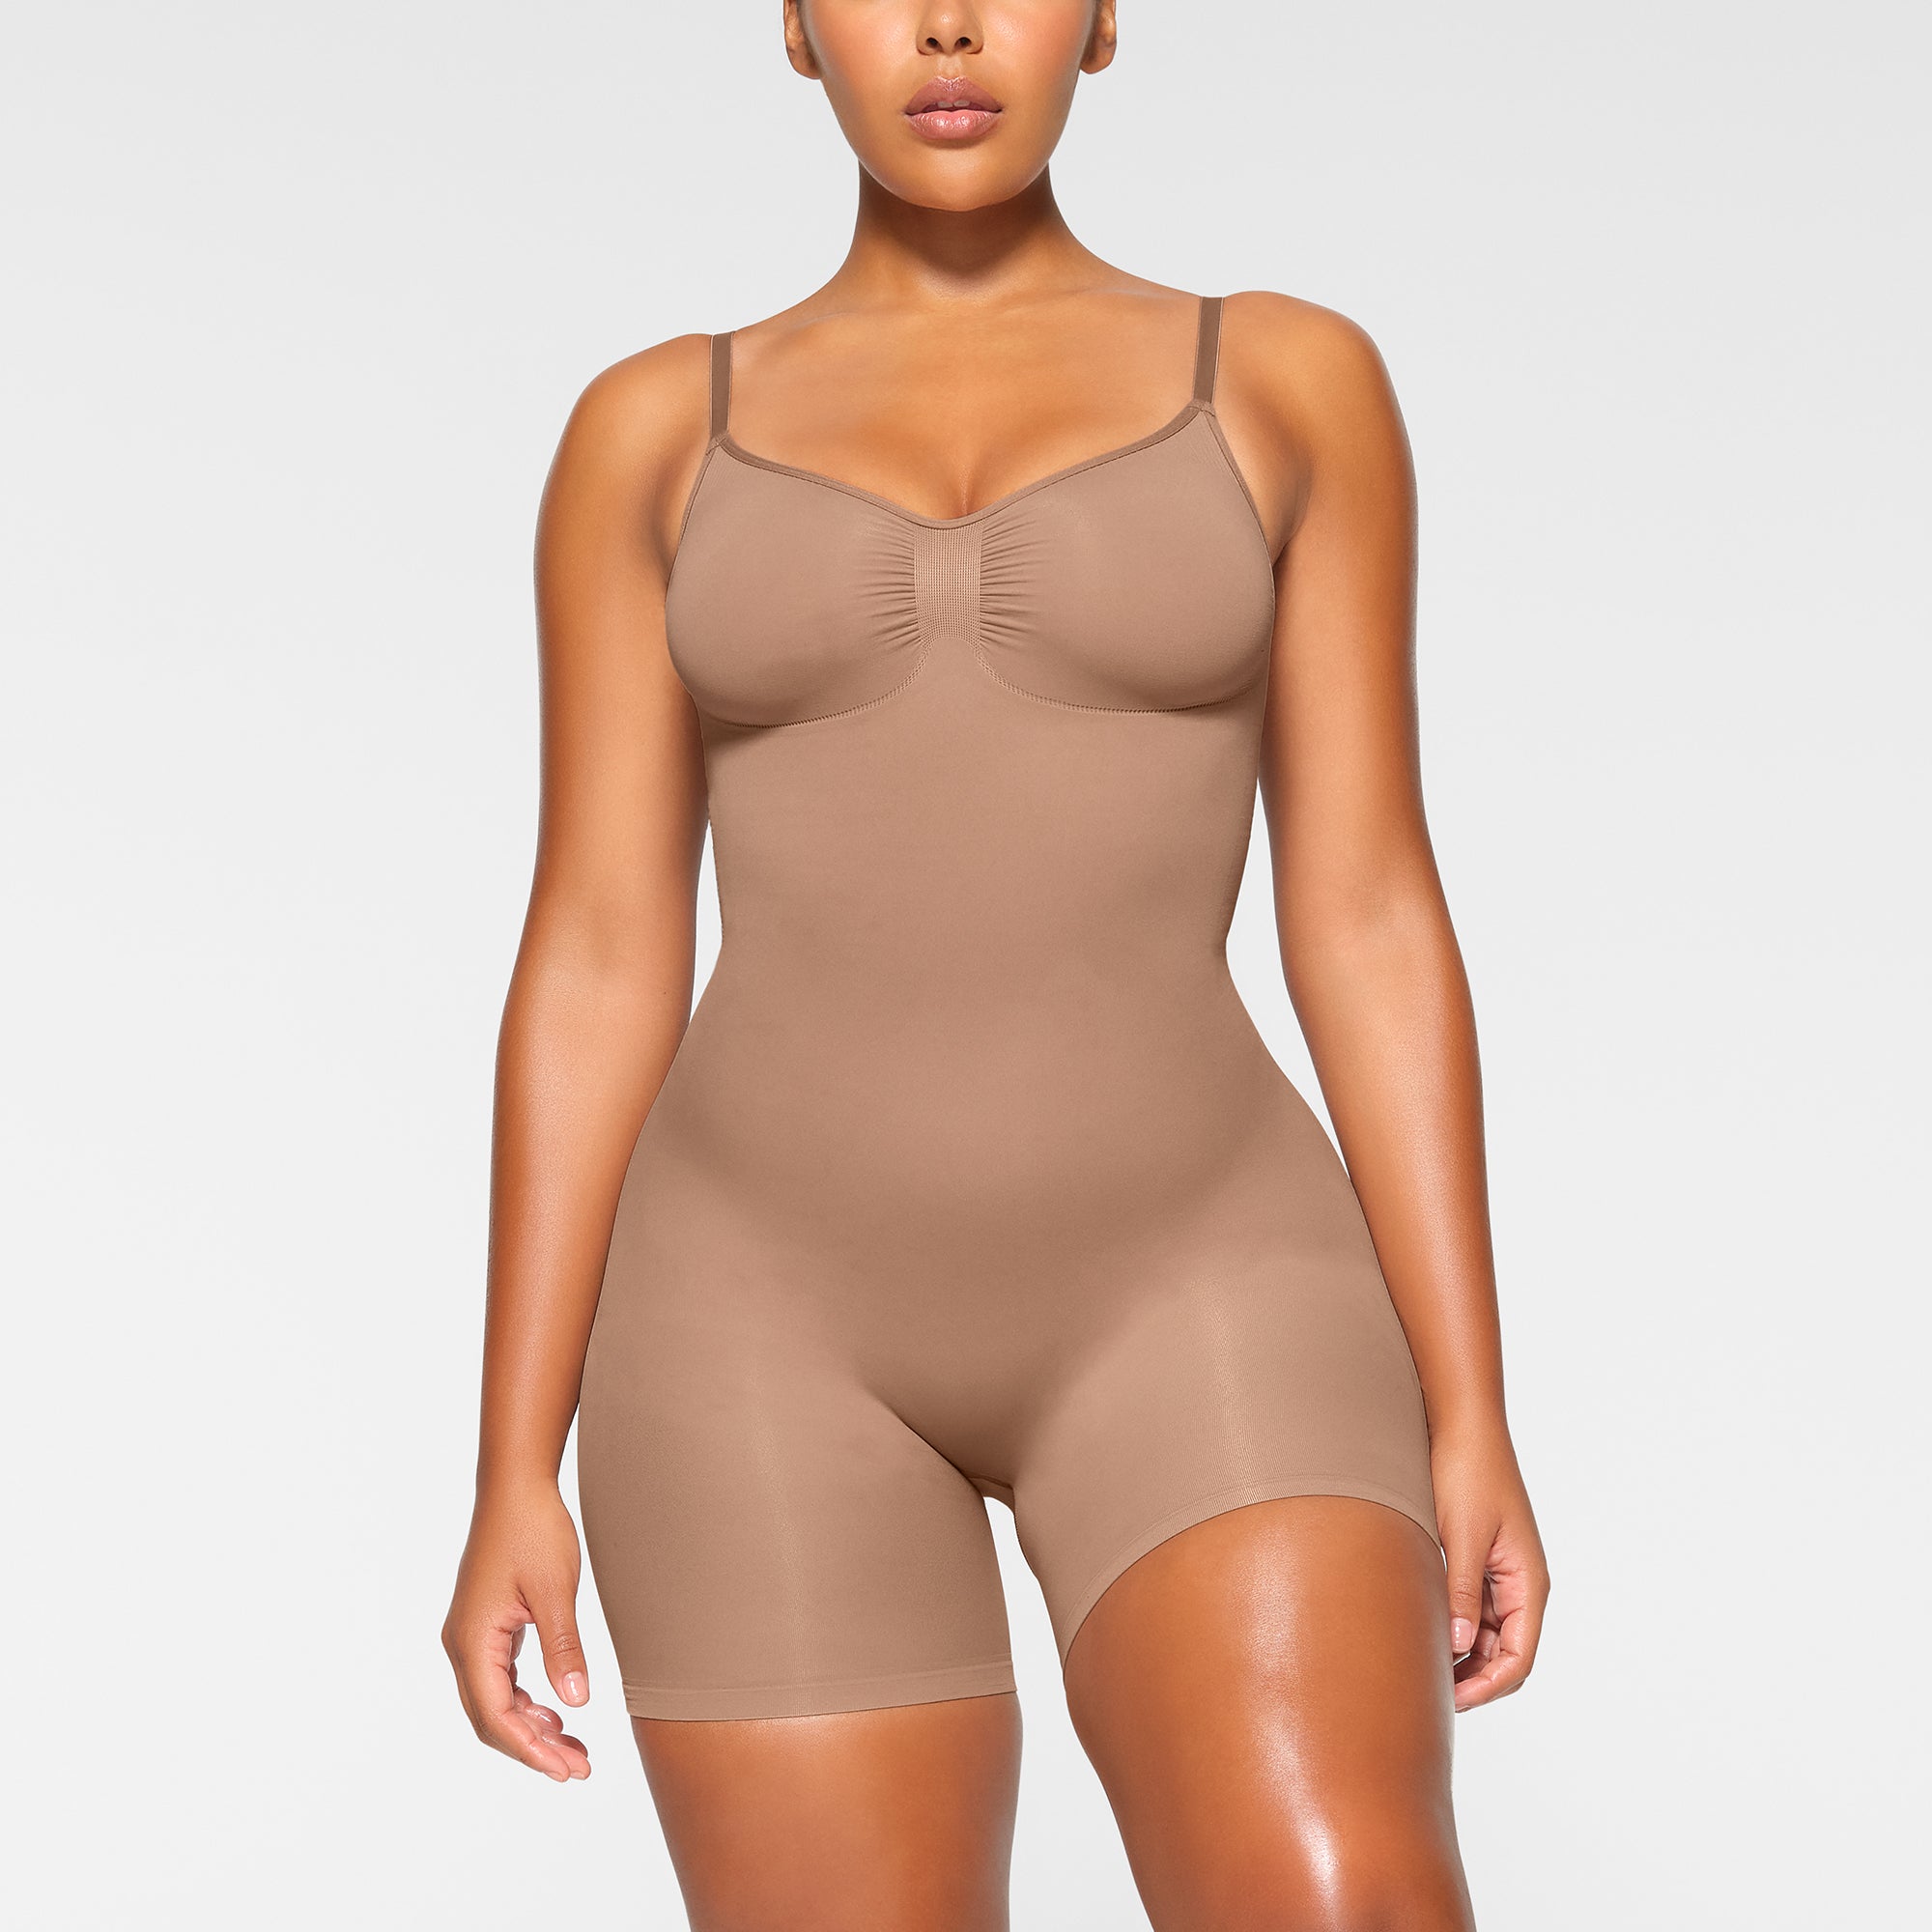 Introduction to Skims Bodysuits